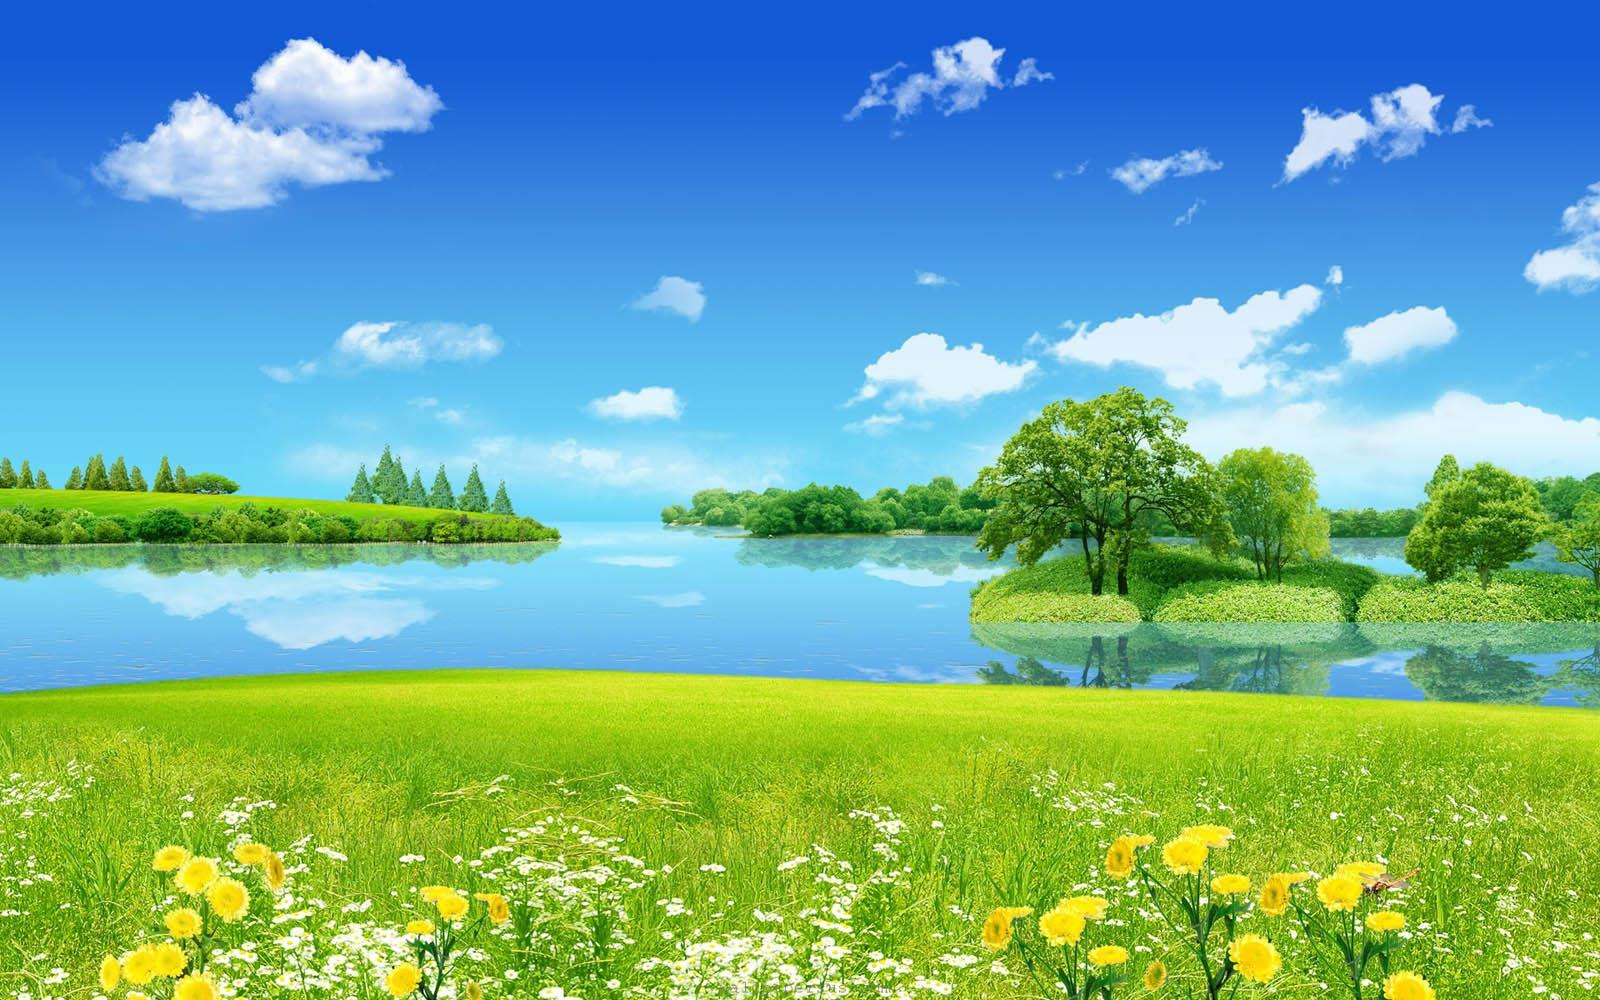 Wallpapers Of Natural Background Images | HD Wallpapers Range